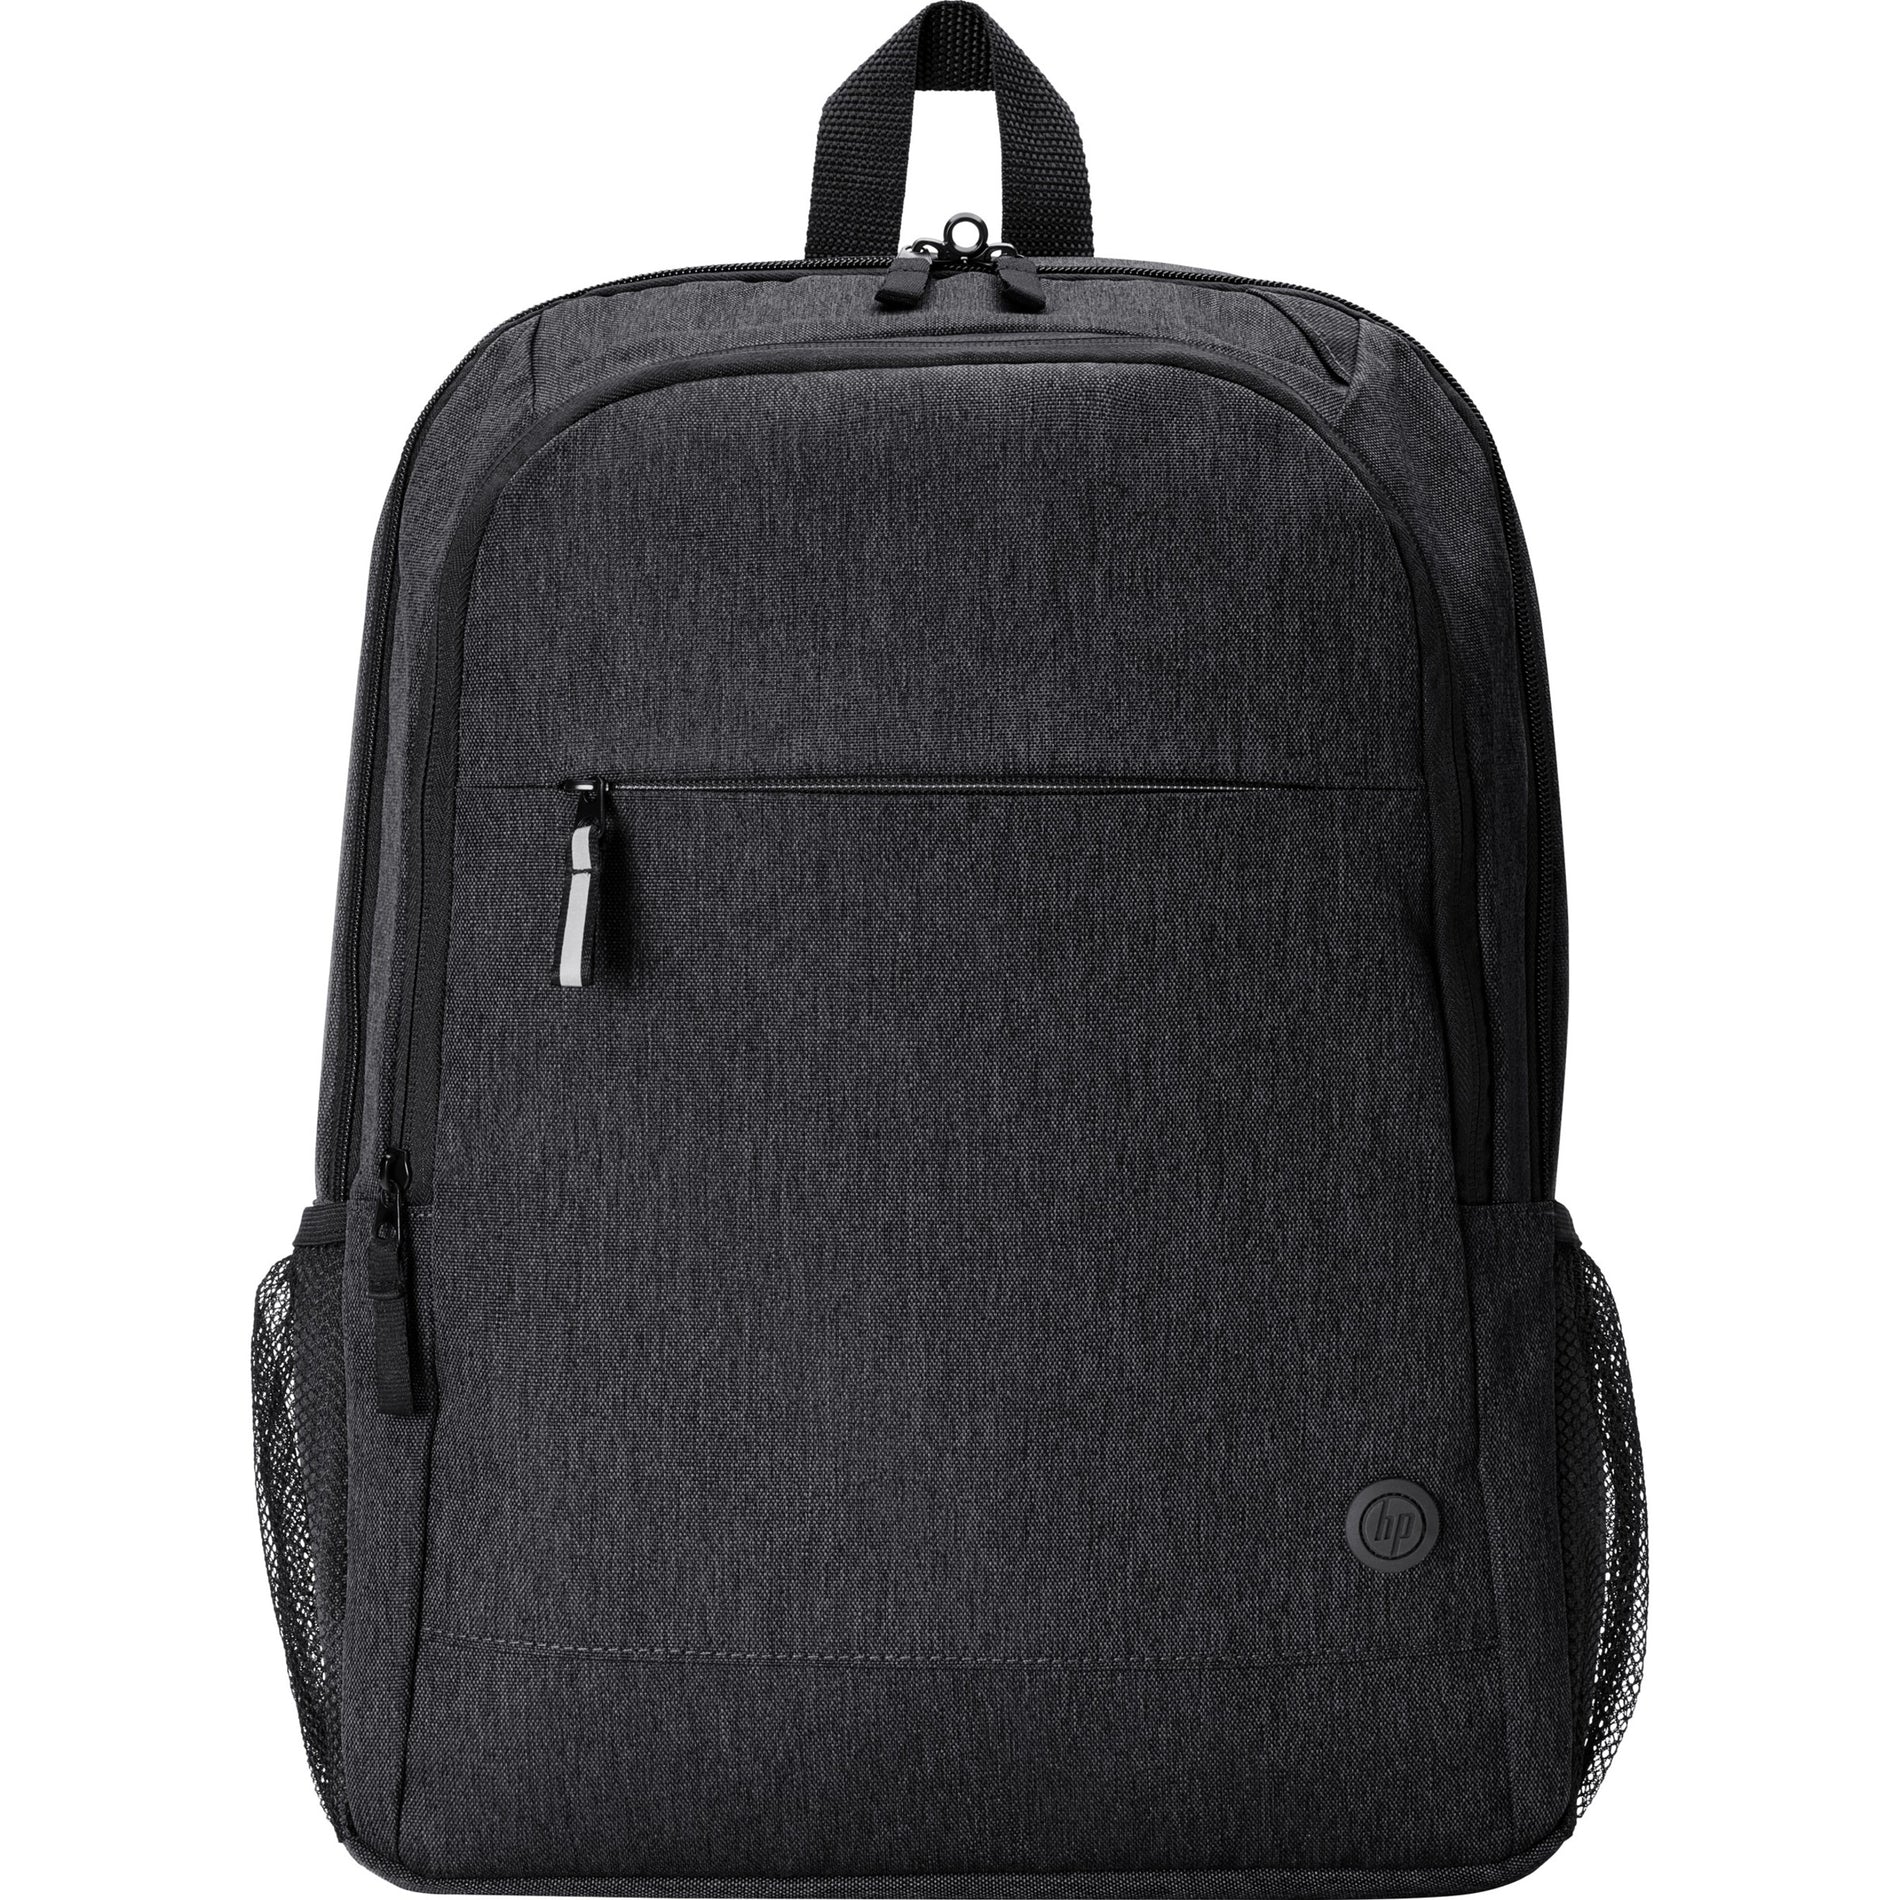 HP 1X644AA Prelude Pro Notebook Case, Black - TAA Compliant, Water Resistant, Lightweight Backpack